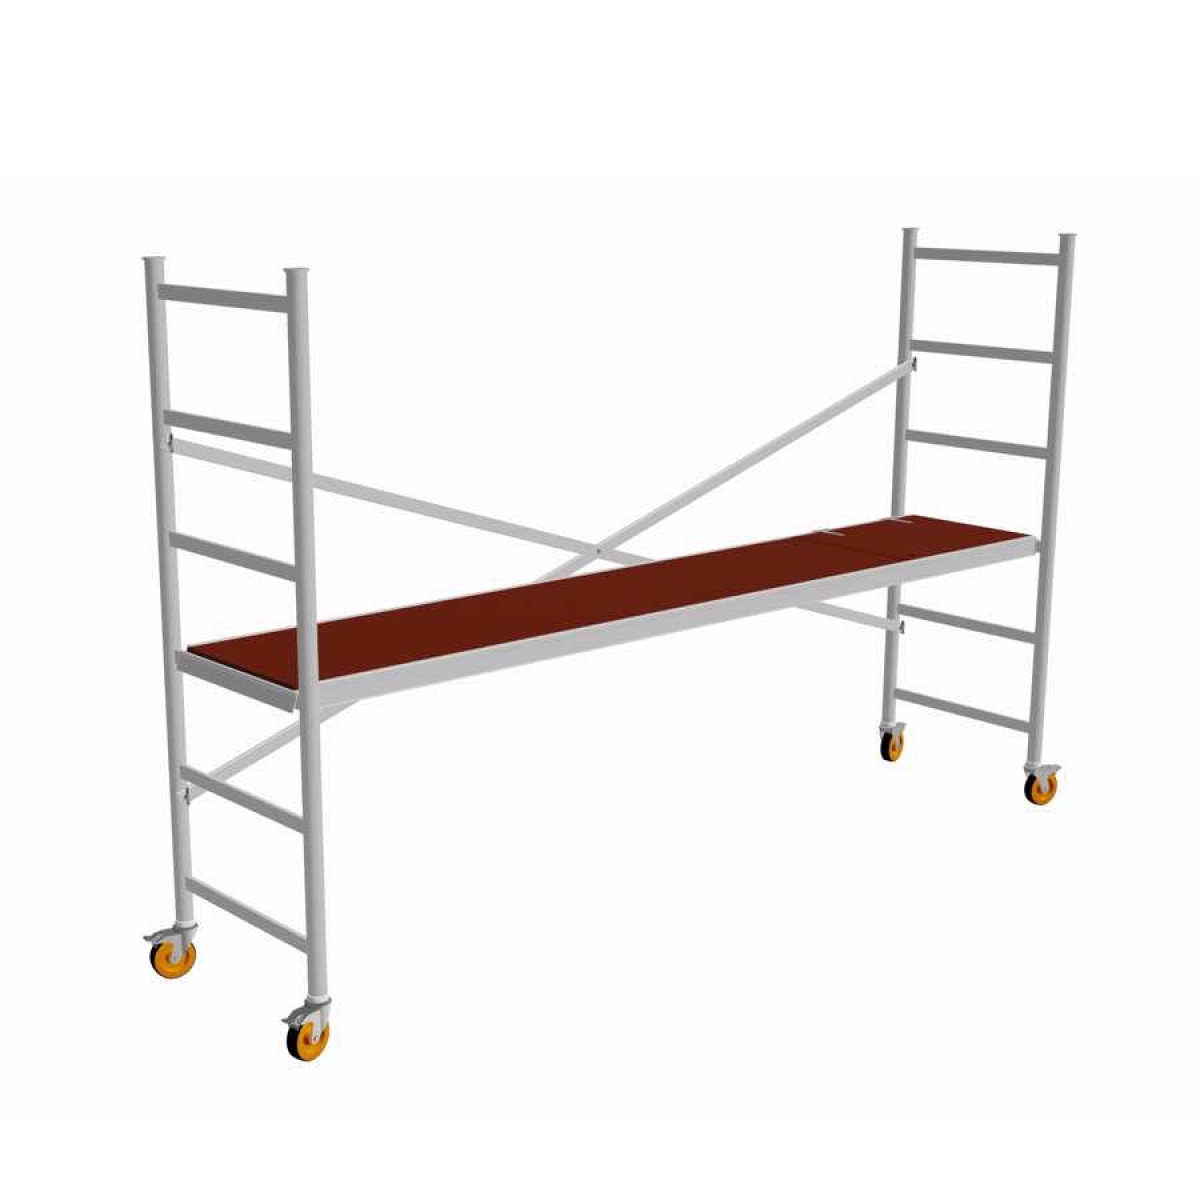 Easy Access Multi-Mobile Scaffold - 3000 Long Series